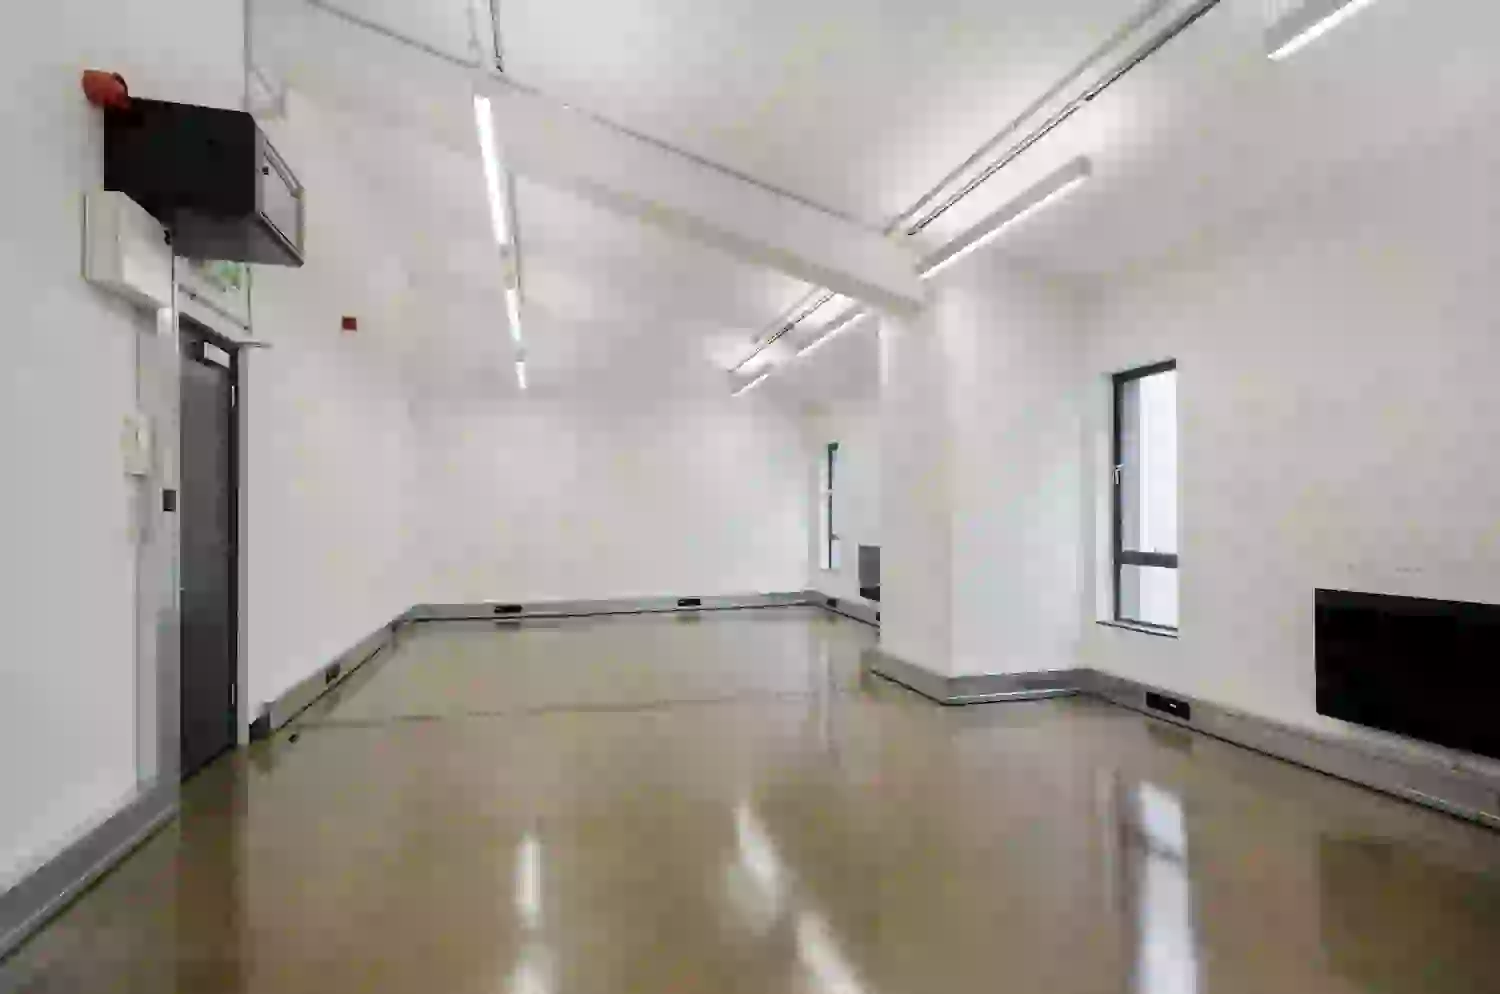 Office space to rent at East London Works, 75  Whitechapel Road, London, unit WH3.27/28, 511 sq ft (47 sq m).